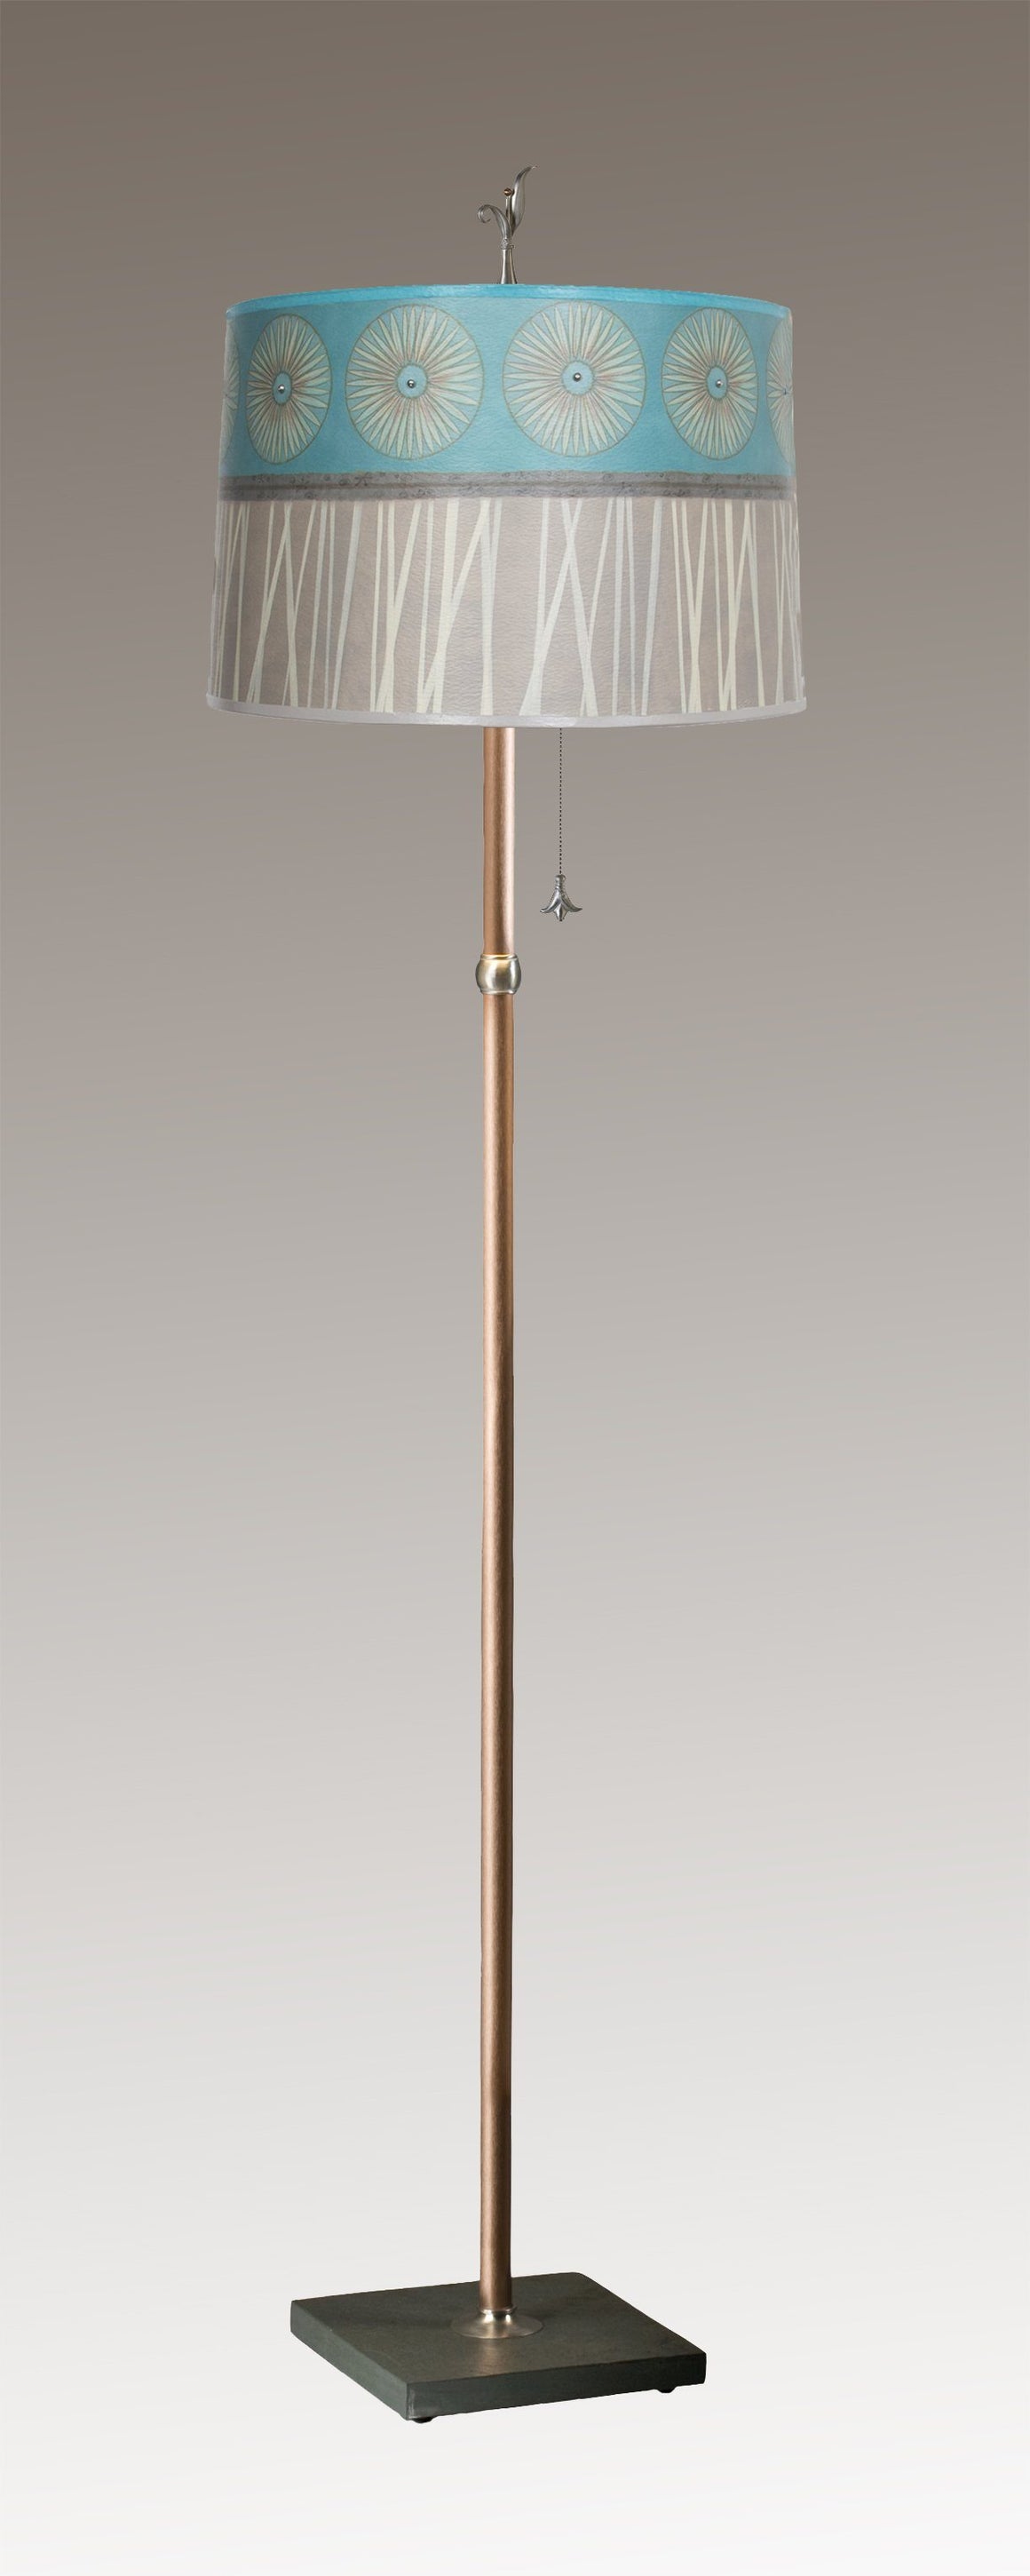 Copper Floor Lamp with Large Drum Shade in Pool